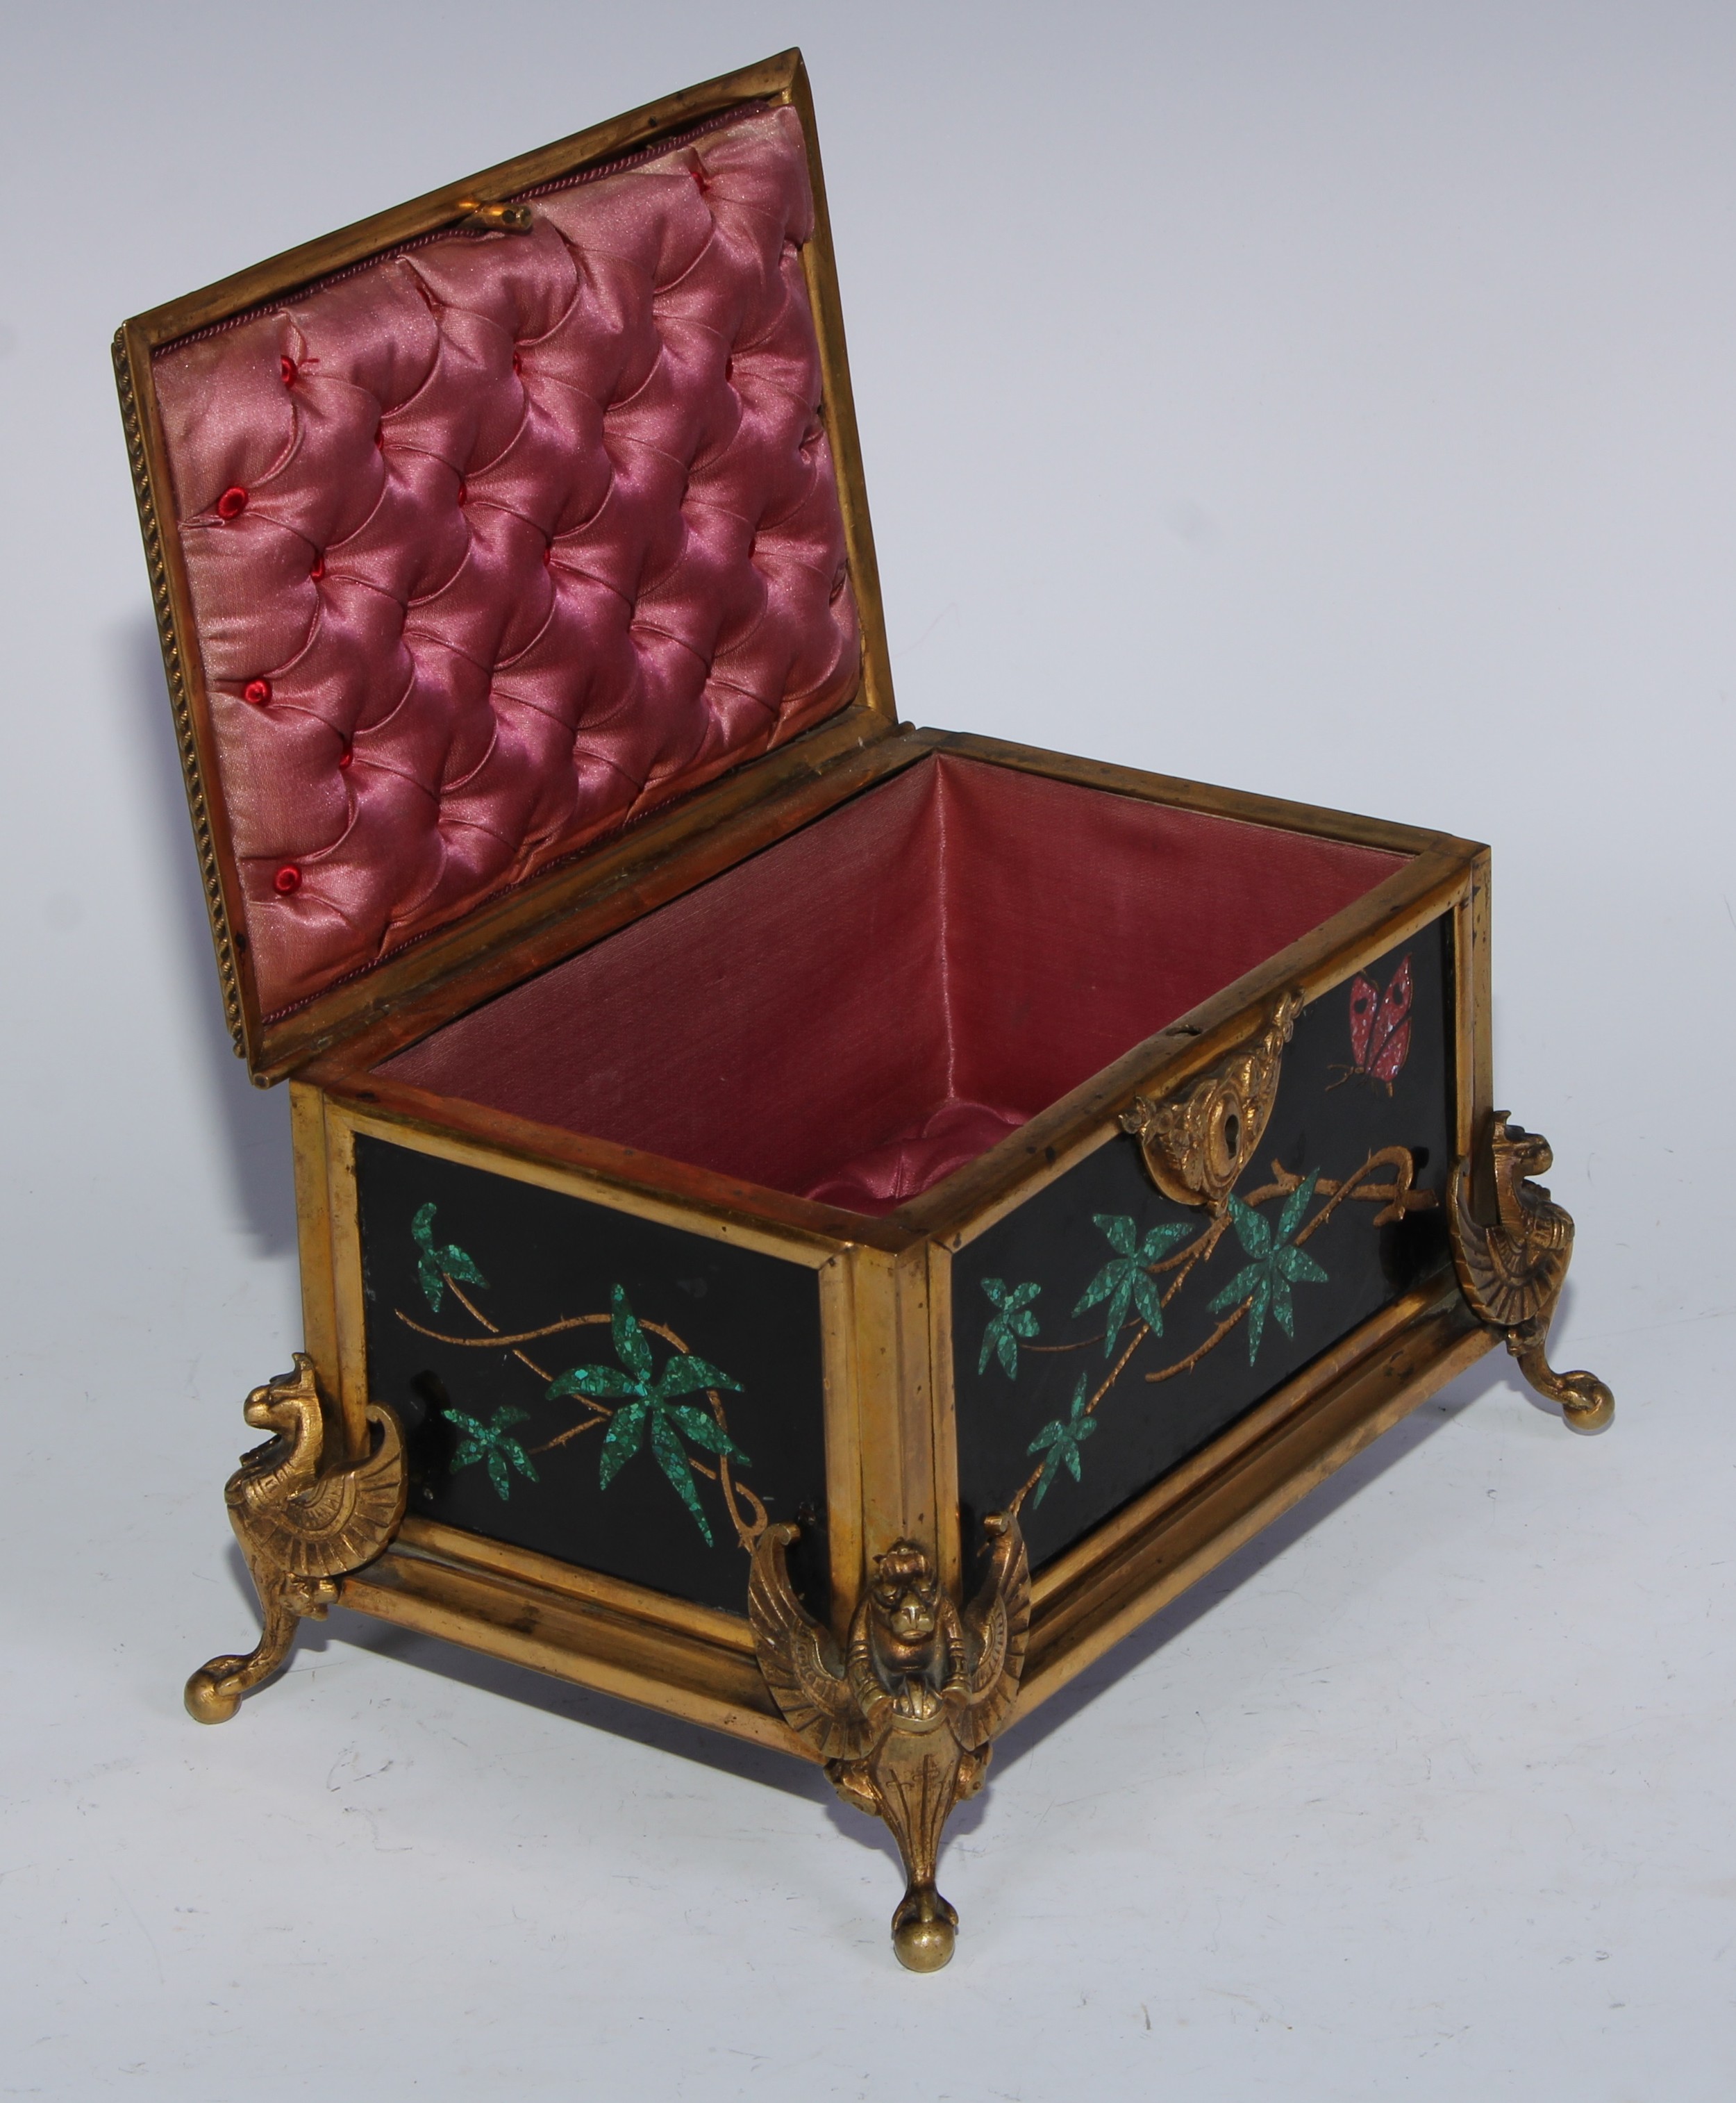 A 19th century ormolu and pietra dura casket, the top, front, sides and back each set with panels of - Image 3 of 6